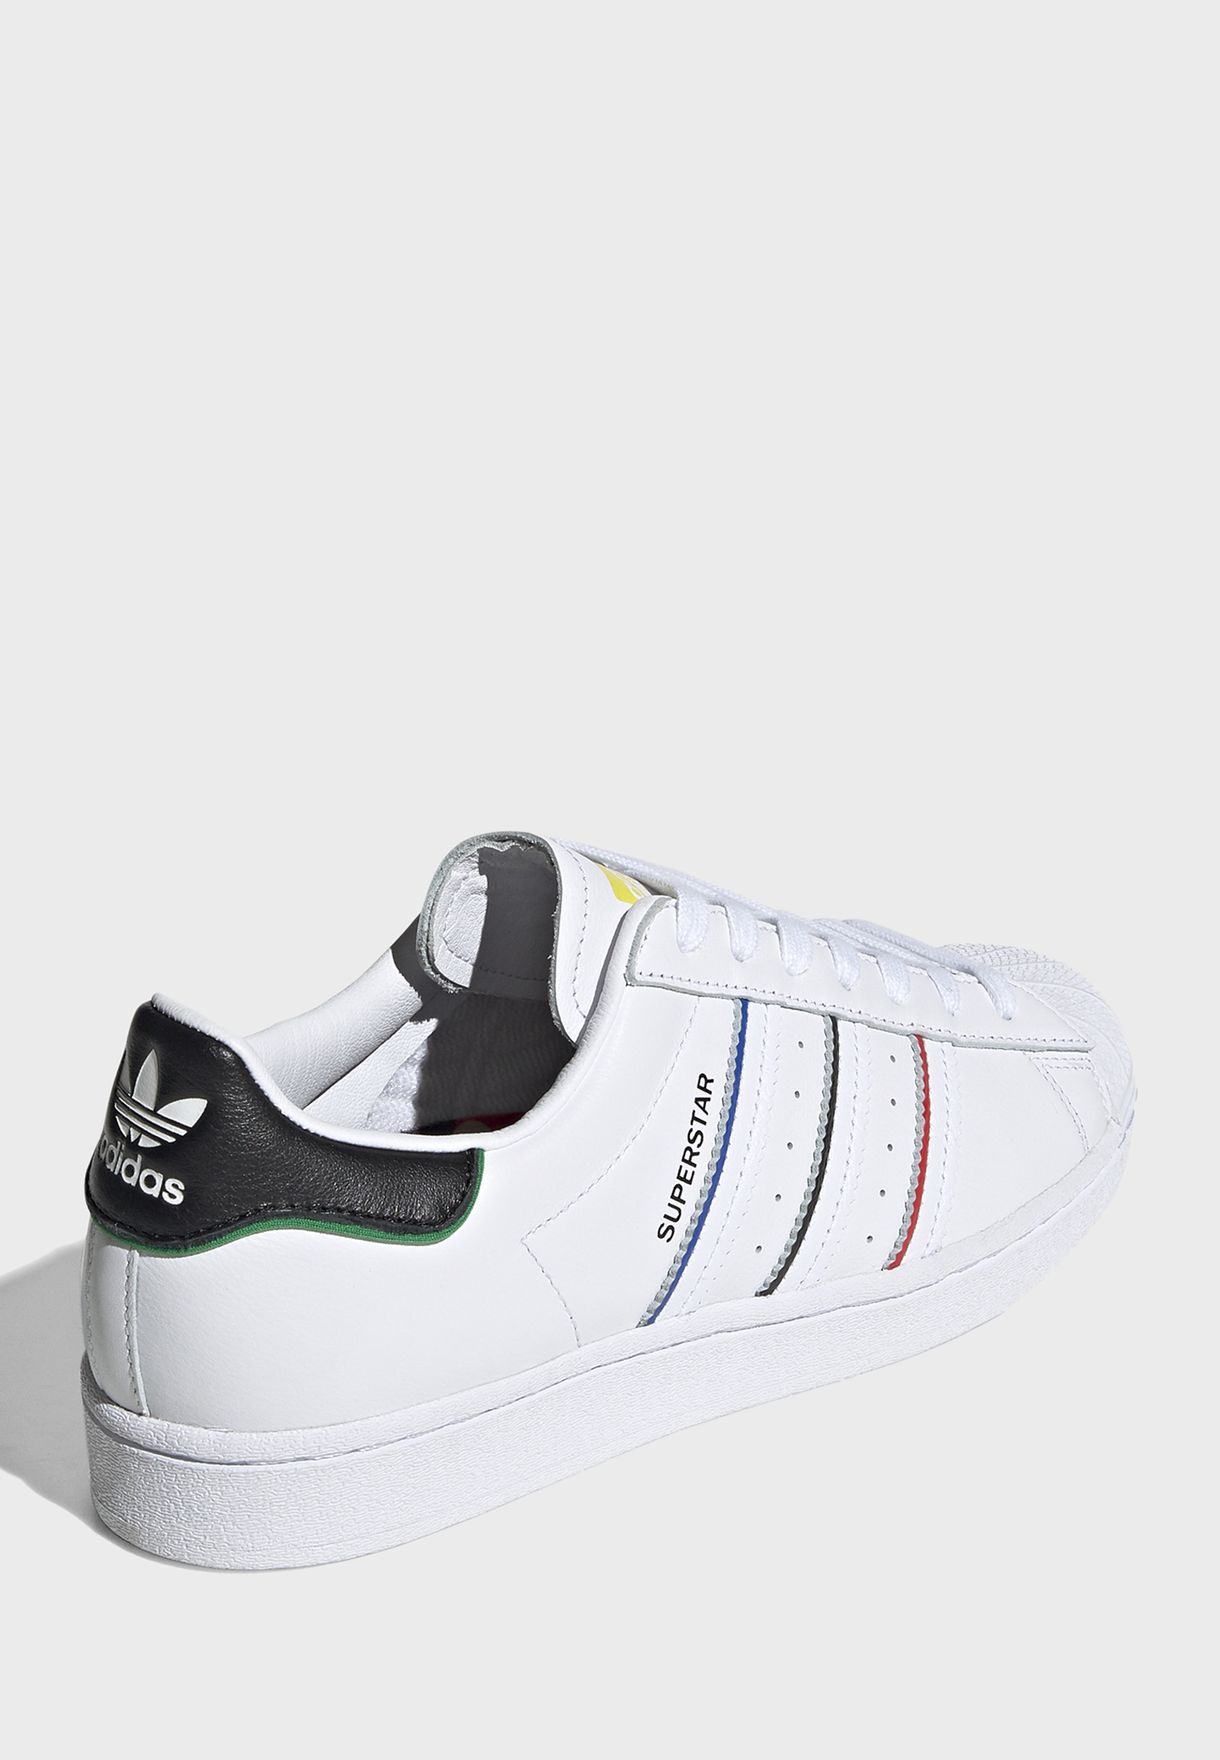 Superstar Casual Men's Sneakers Shoes